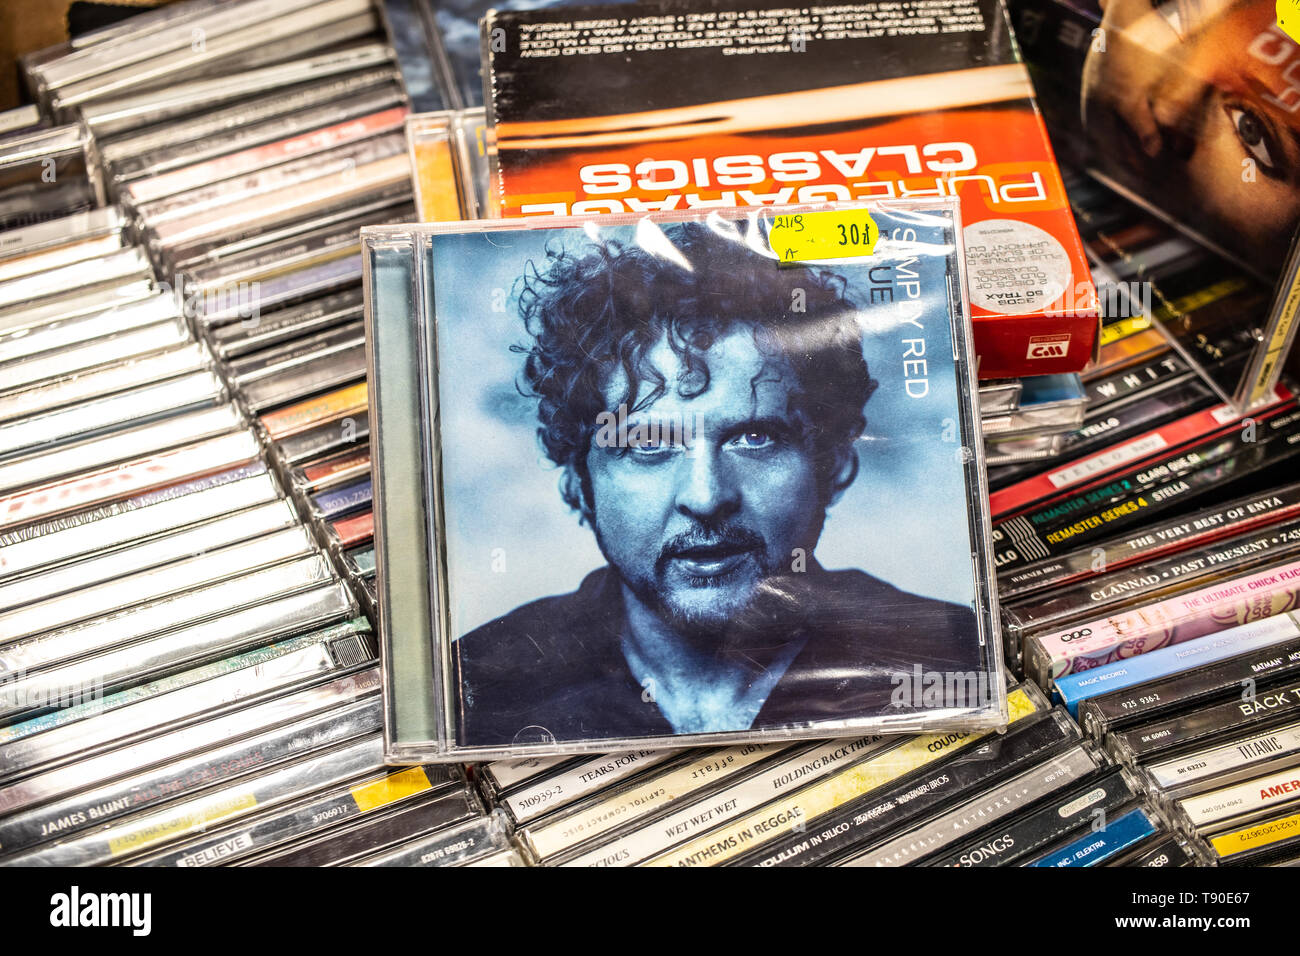 Nadarzyn, Poland, May 11, 2019: Simply Red BLUE CD album on display for sale, famous British soul and pop band, lead singer Mick Hucknall, collection Stock Photo